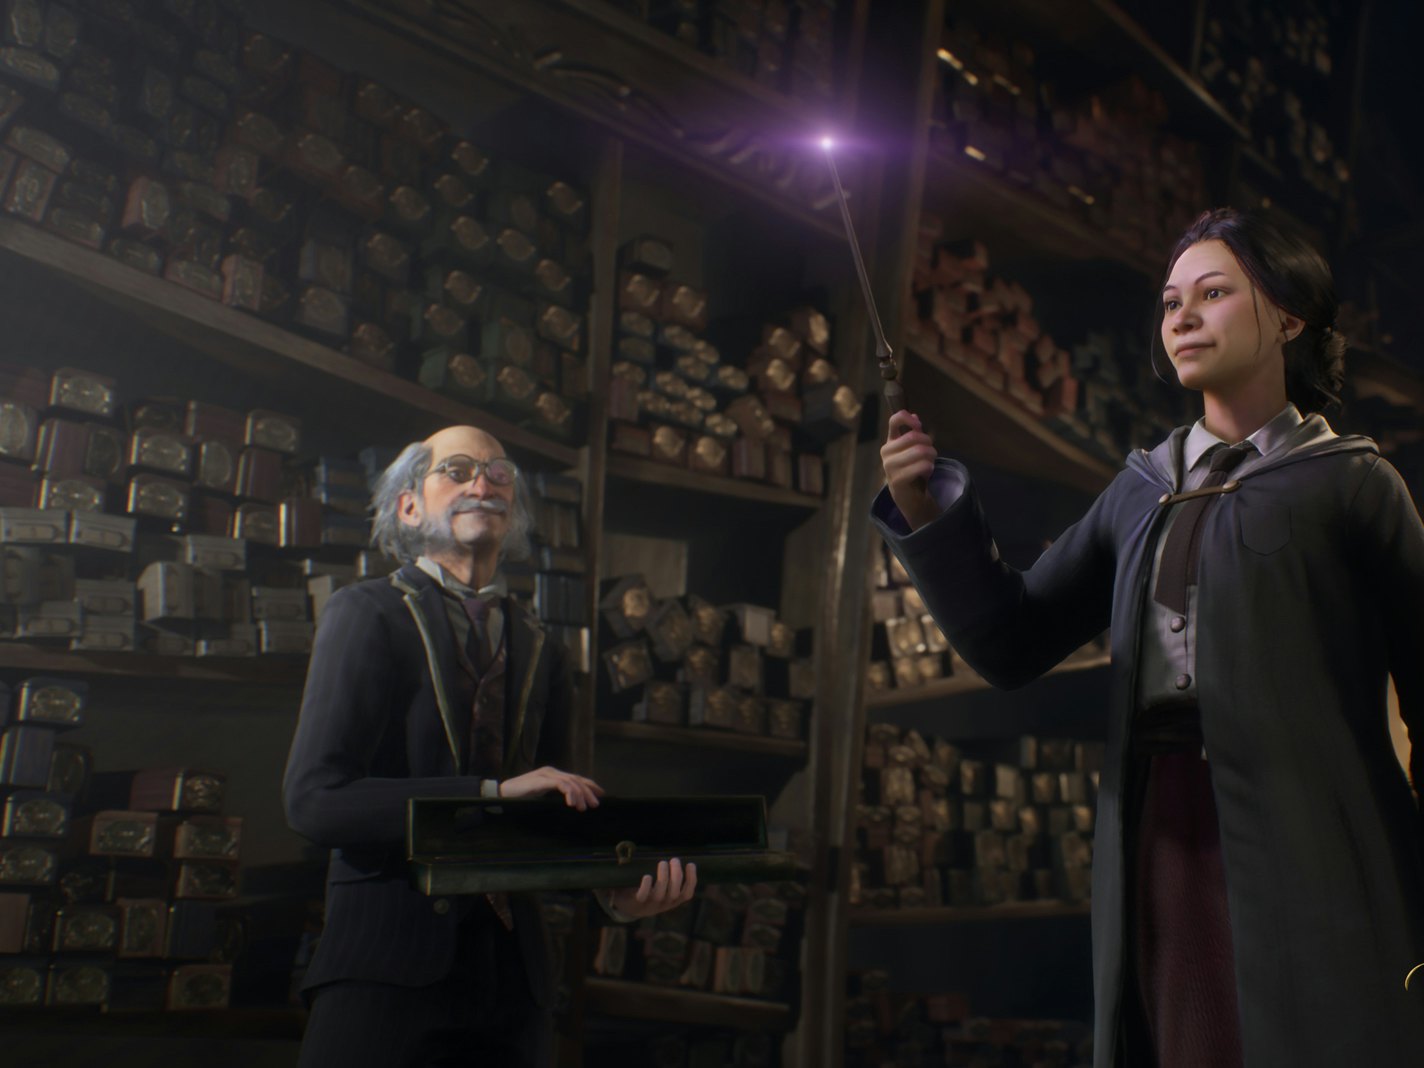 hogwarts legacy ps5 controller release date